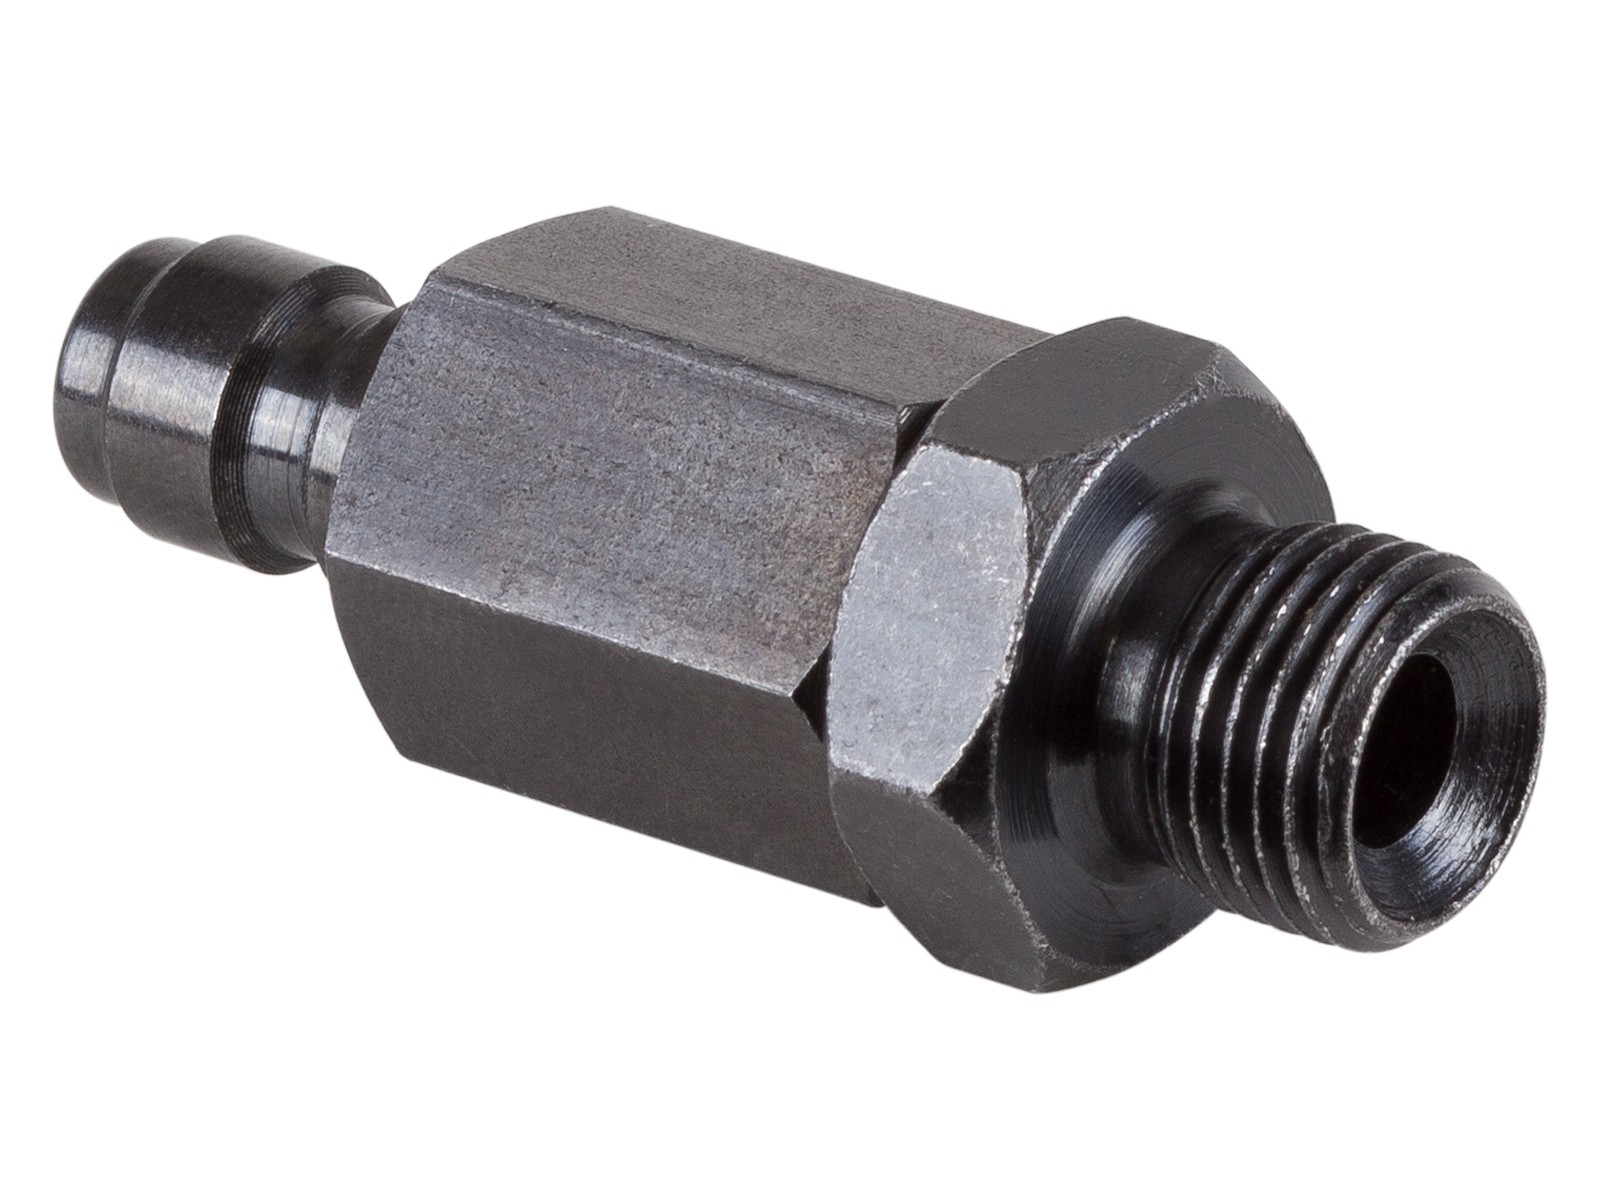 Air Venturi Male Quick-Disconnect, 1/8" BSPP Male Threads, Steel, Rated to 5000 PSI